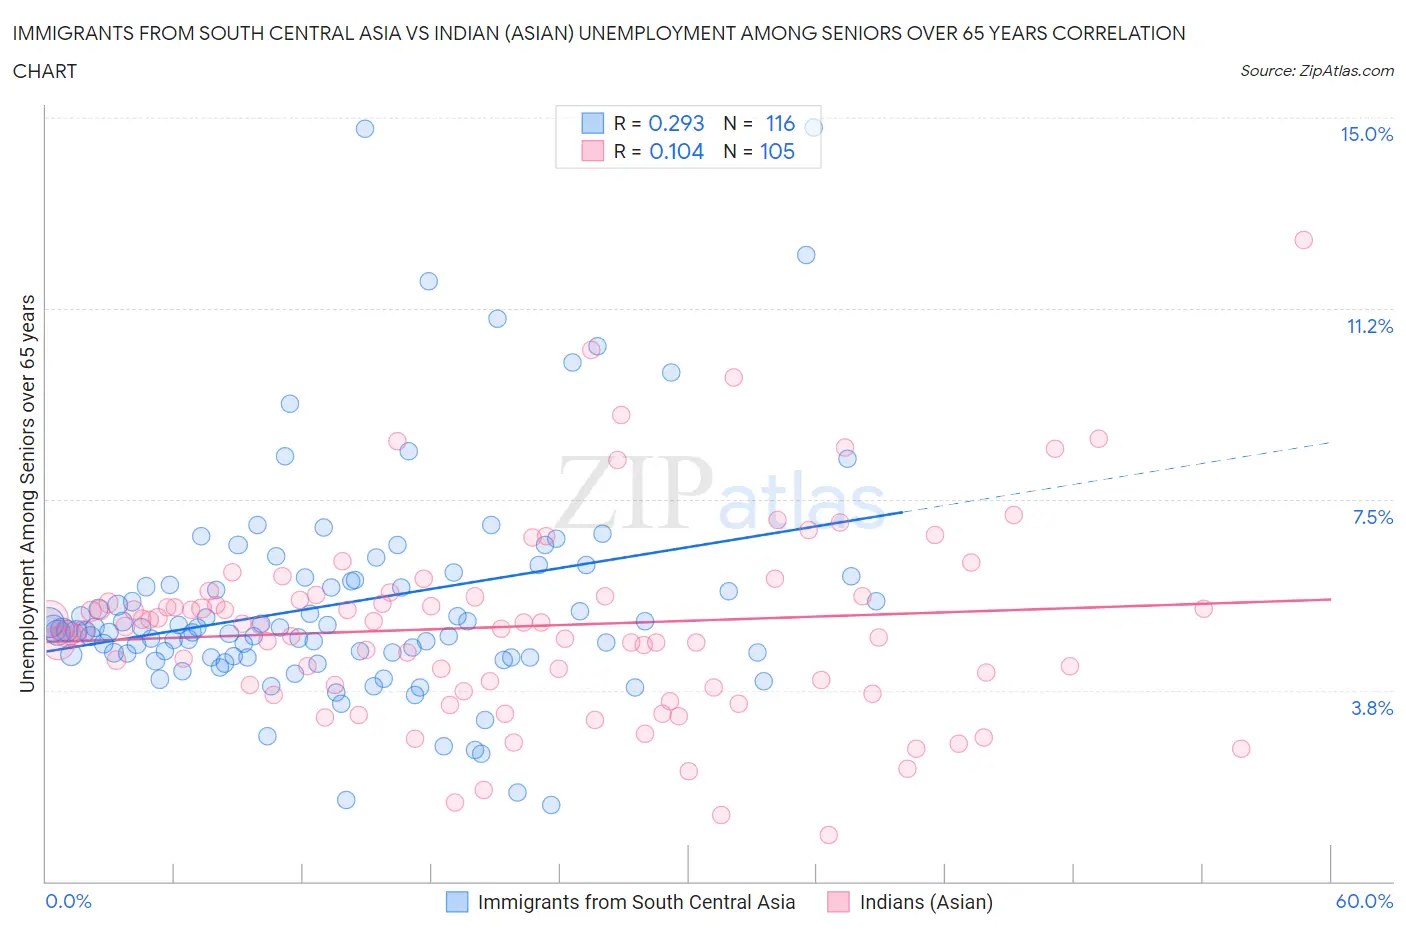 Immigrants from South Central Asia vs Indian (Asian) Unemployment Among Seniors over 65 years